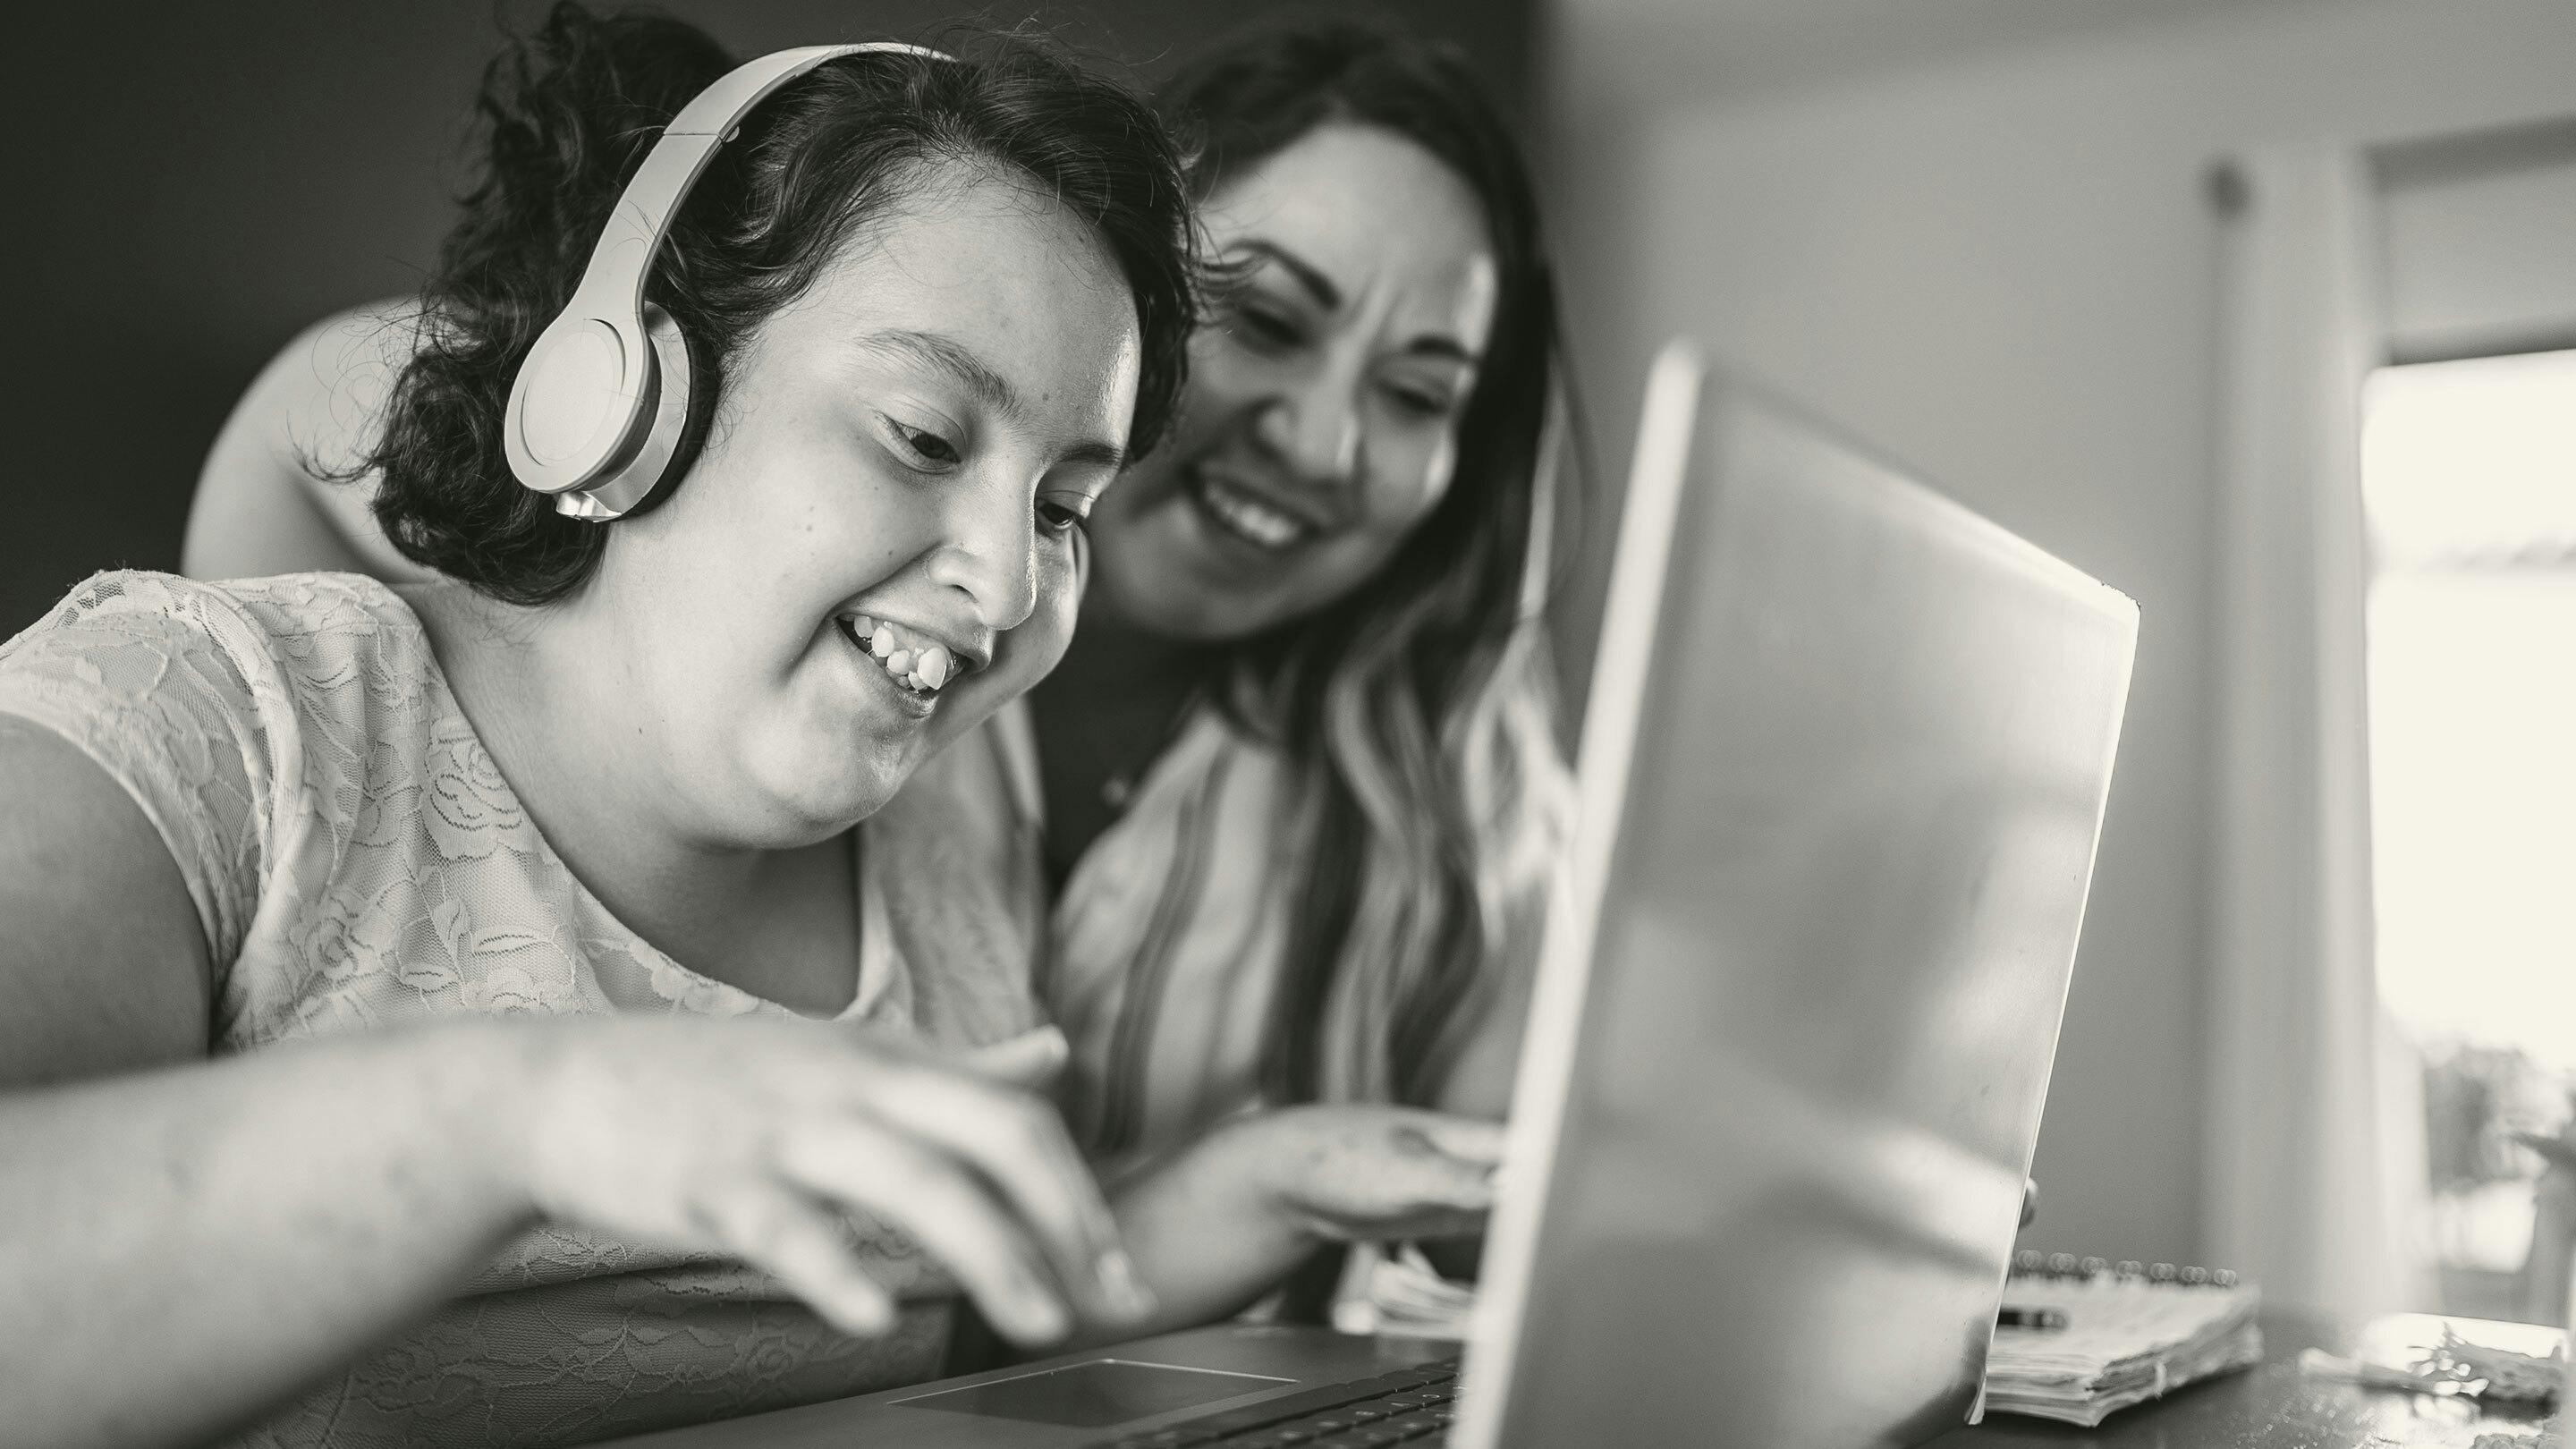 Disabled high schooler online with headphones on smiling and doing schoolwork on a laptop, with mother in background helping